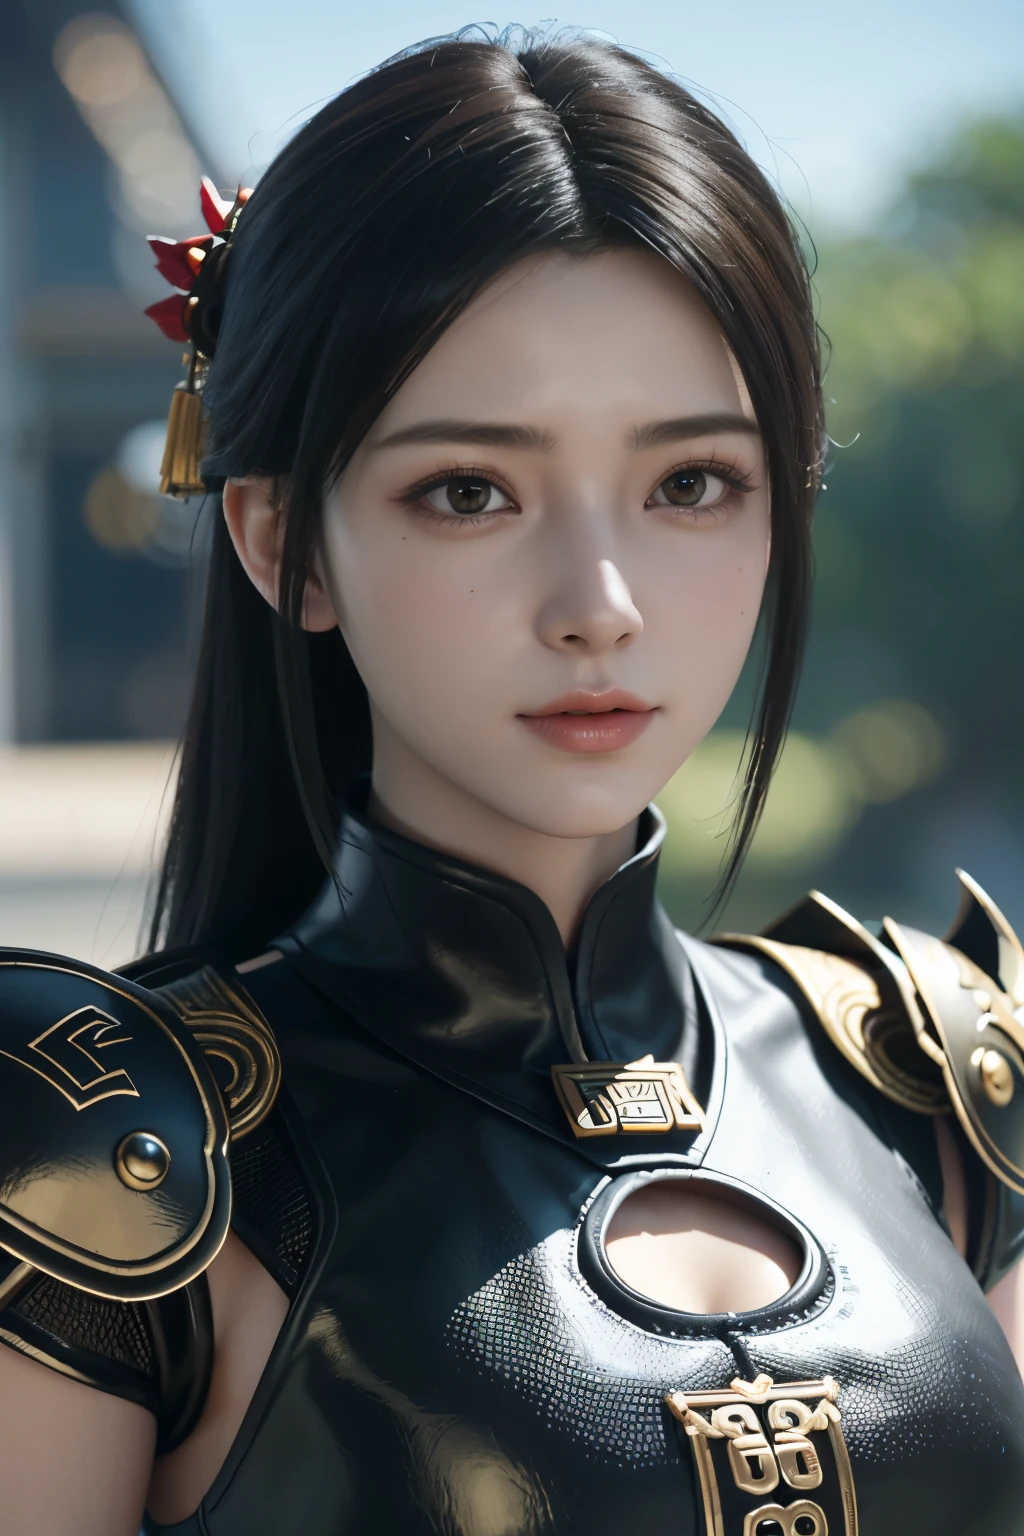 Game art，The best picture quality，Highest resolution，8K，((A bust photograph))，((Portrait))，((Head close-up))，(Rule of thirds)，Unreal Engine 5 rendering works， (The Girl of the Future)，(Female Warrior)， 22-year-old girl，(Female hackers)，(Rainbow hair，Ancient Oriental hairstyle)，((The pupils of the red eyes:1.3))，(A beautiful eye full of detail)，(Big breasts)，(Eye shadow)，Elegant and charming，indifferent，((Anger))，(General armor in ancient Chinese style，Joint Armor，There are exquisite Chinese patterns on the clothes，A flash of jewellery)，figure，Fantasy style， Photo poses，City background，Movie lights，Ray tracing，Game CG，((3D Unreal Engine))，oc rendering reflection pattern